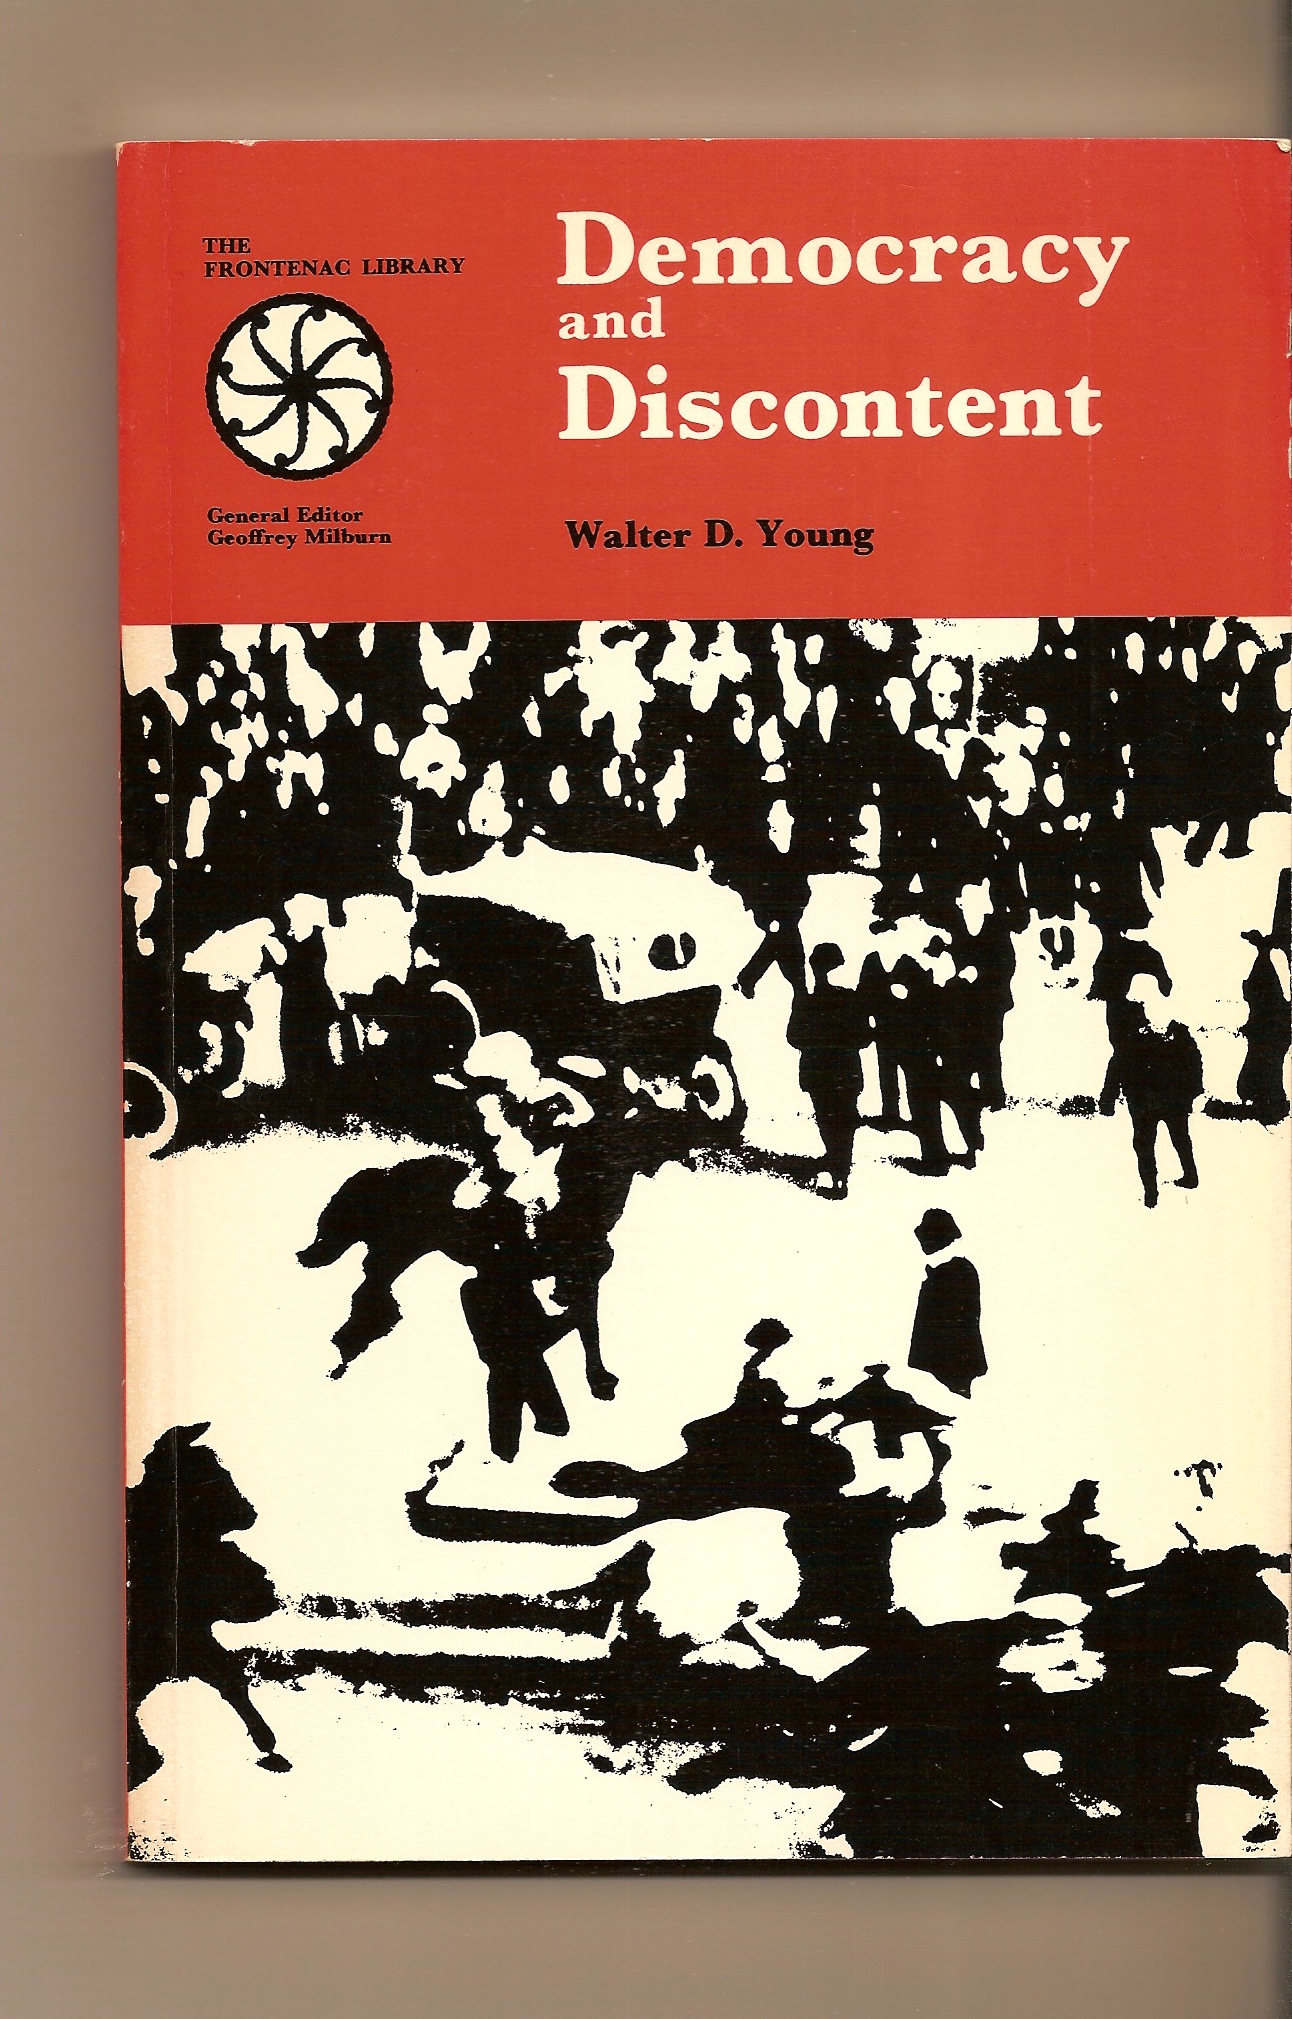 YOUNG WALTER D. - Democracy and Discontent